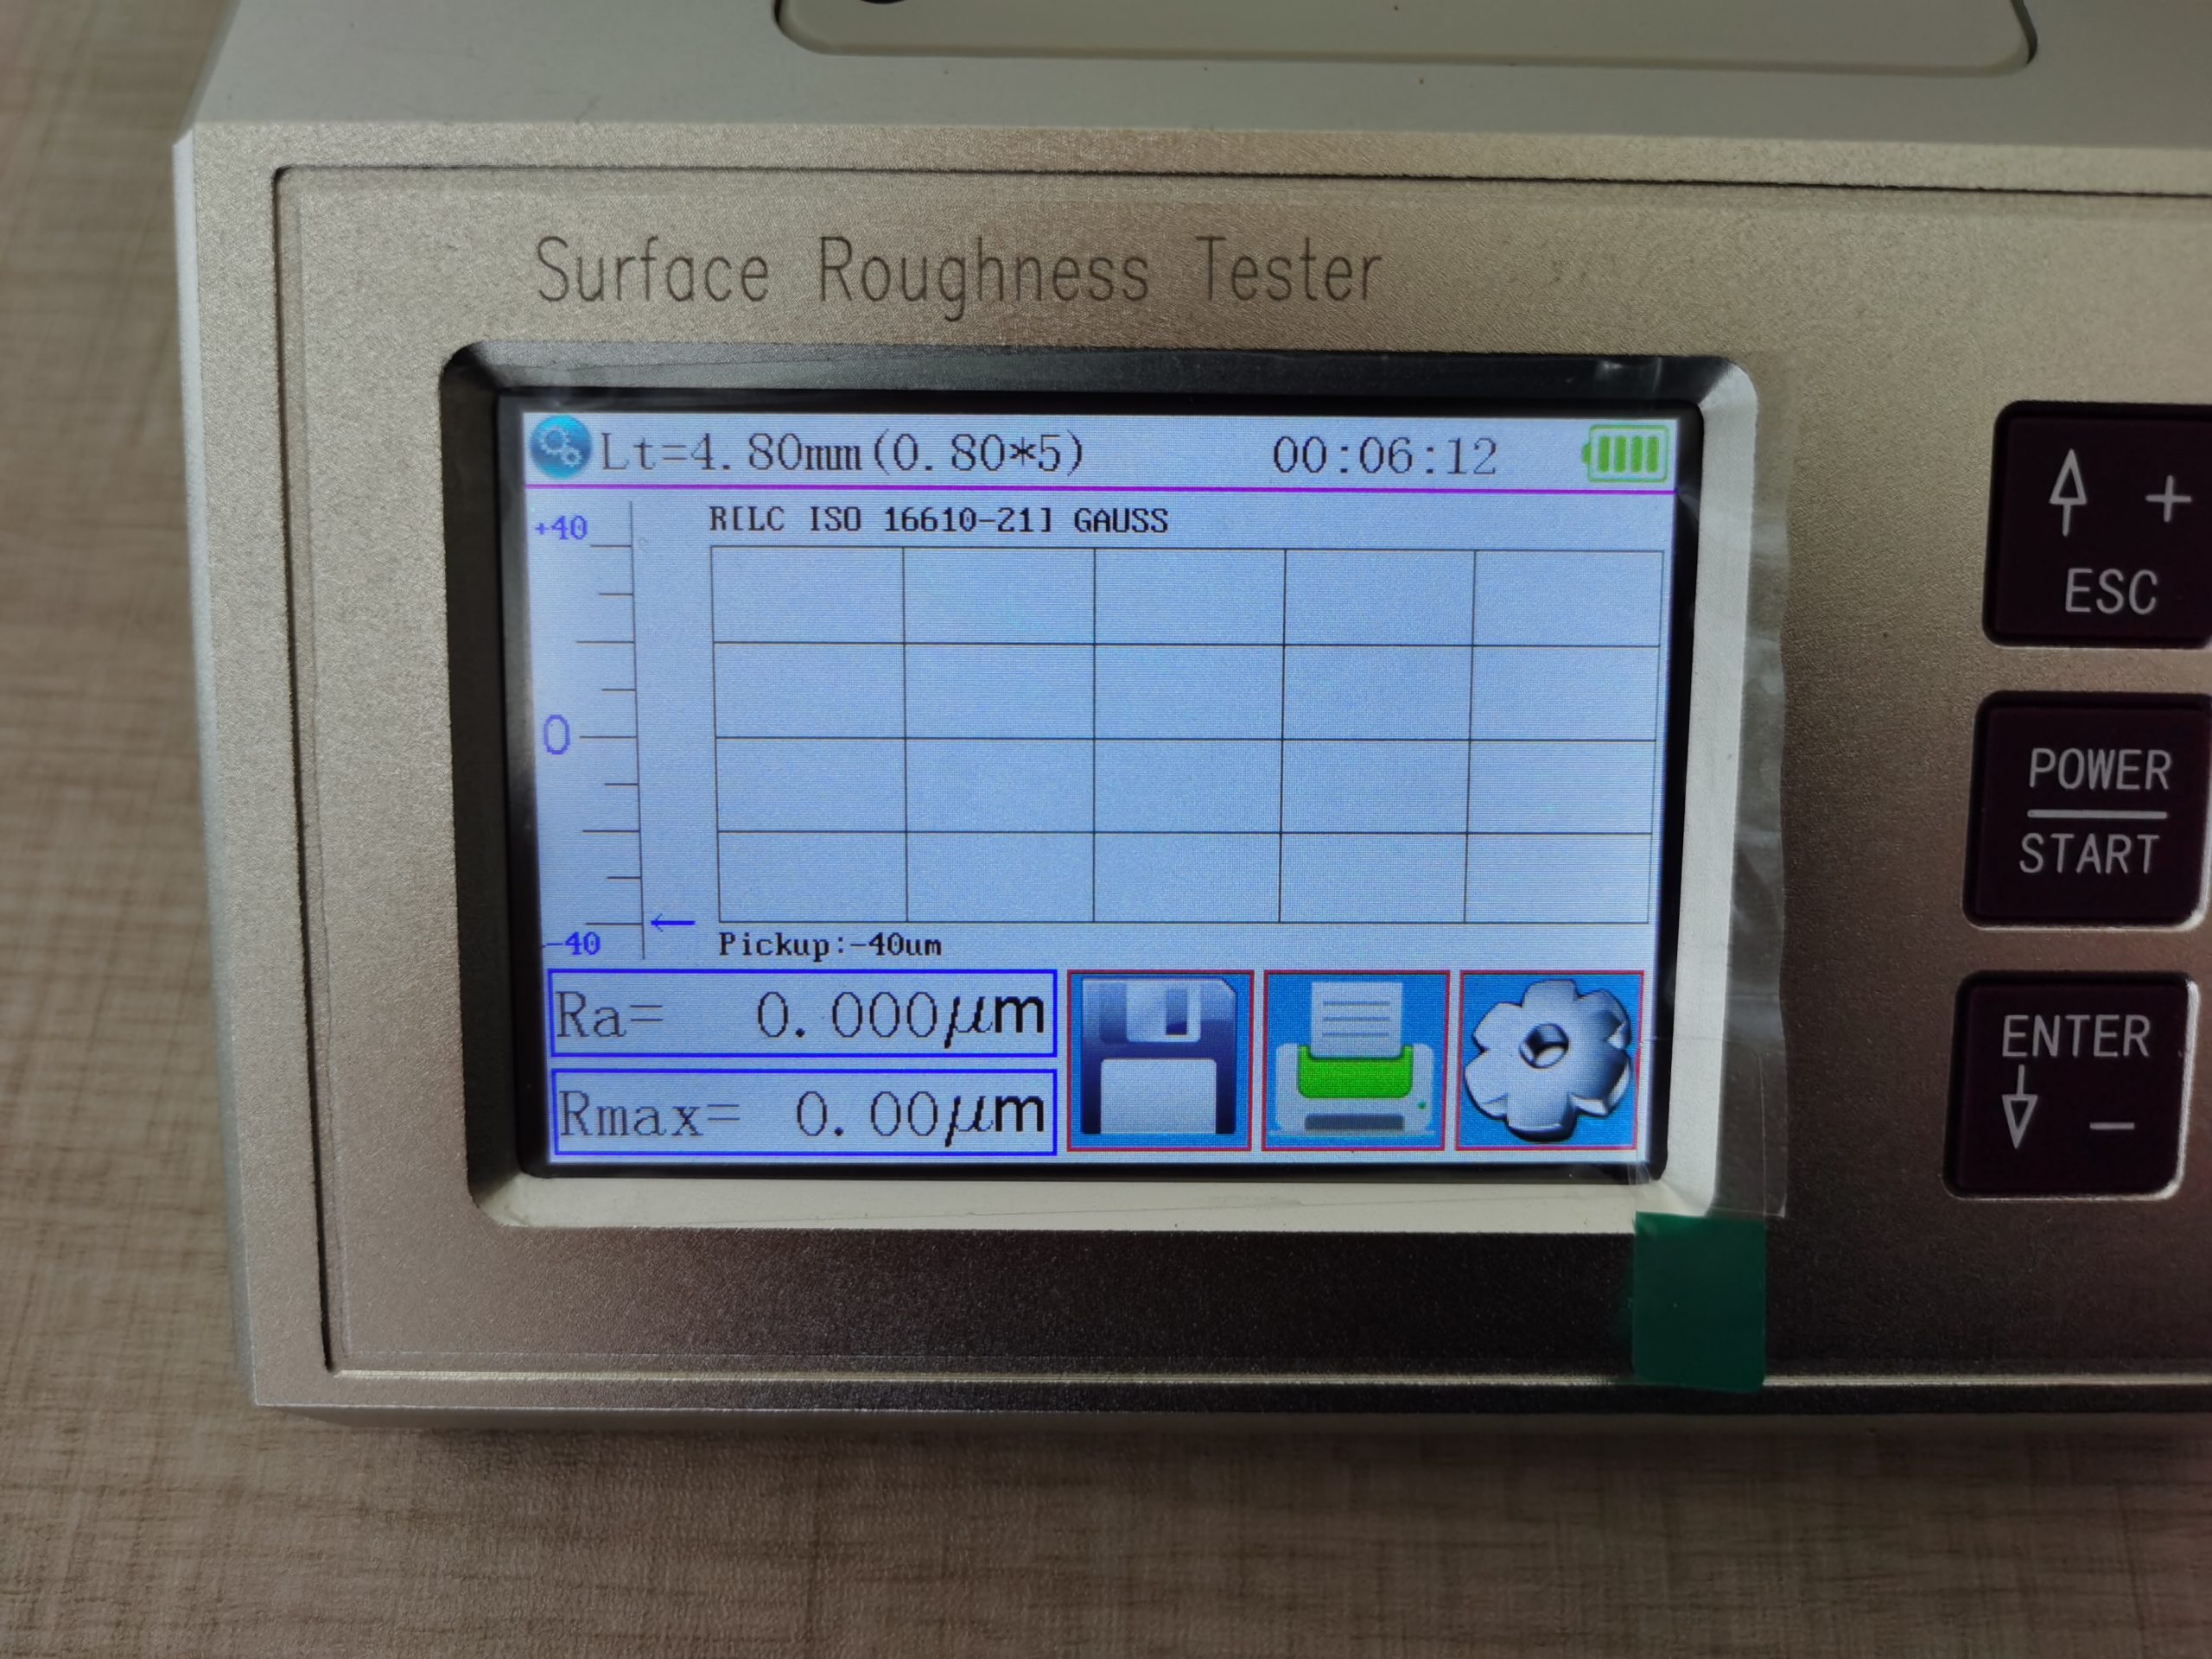 Surface Roughness Tester Digital Display Technical Chart